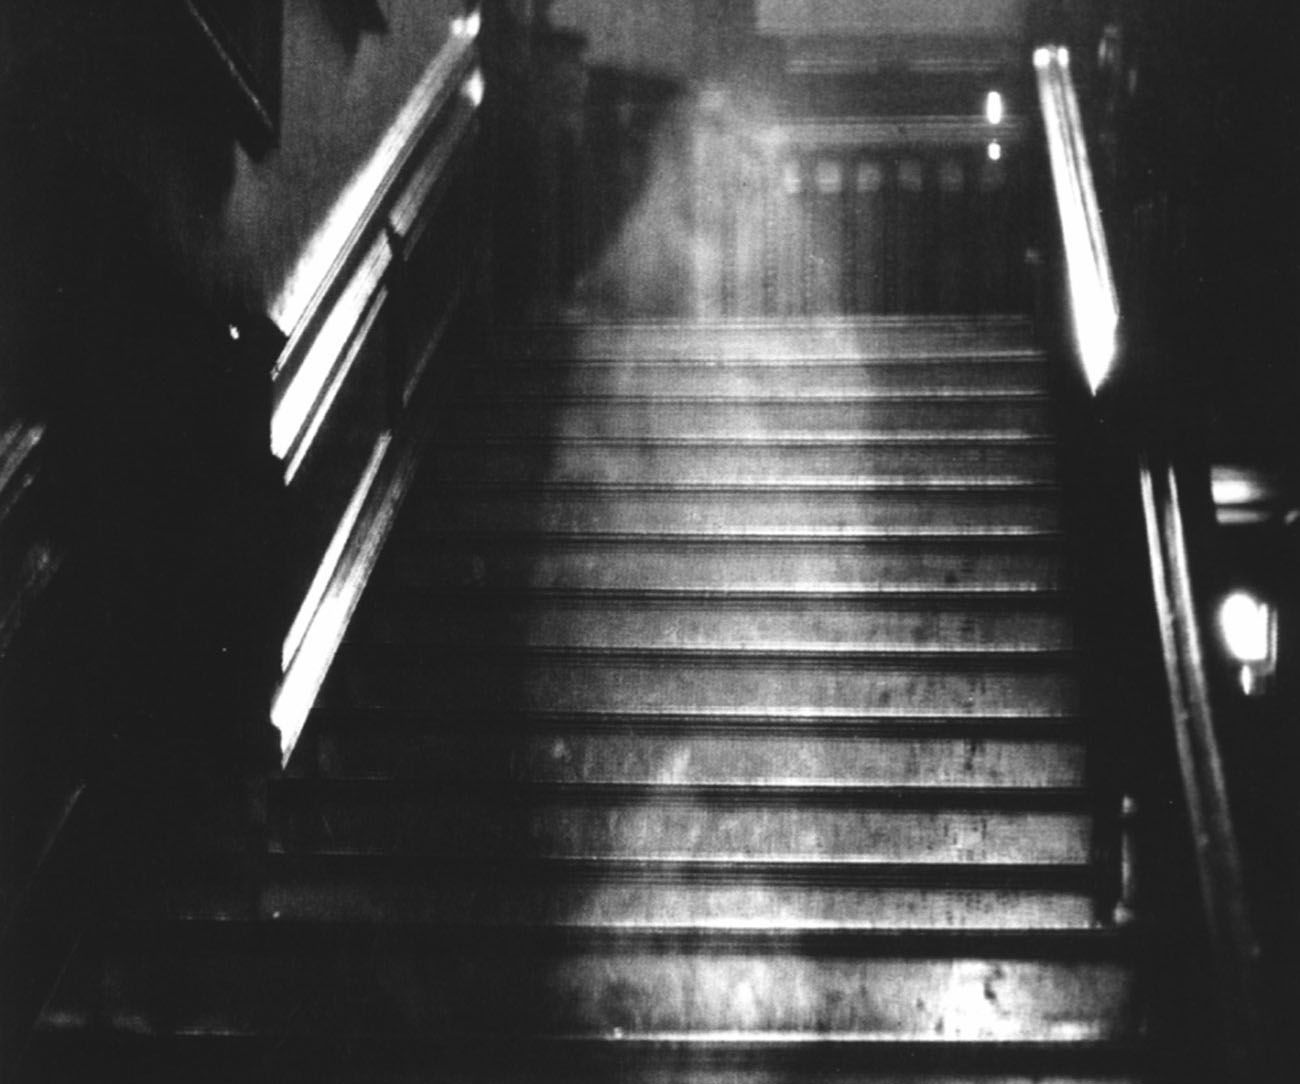 Don’t believe in ghosts? You will after seeing these pictures!